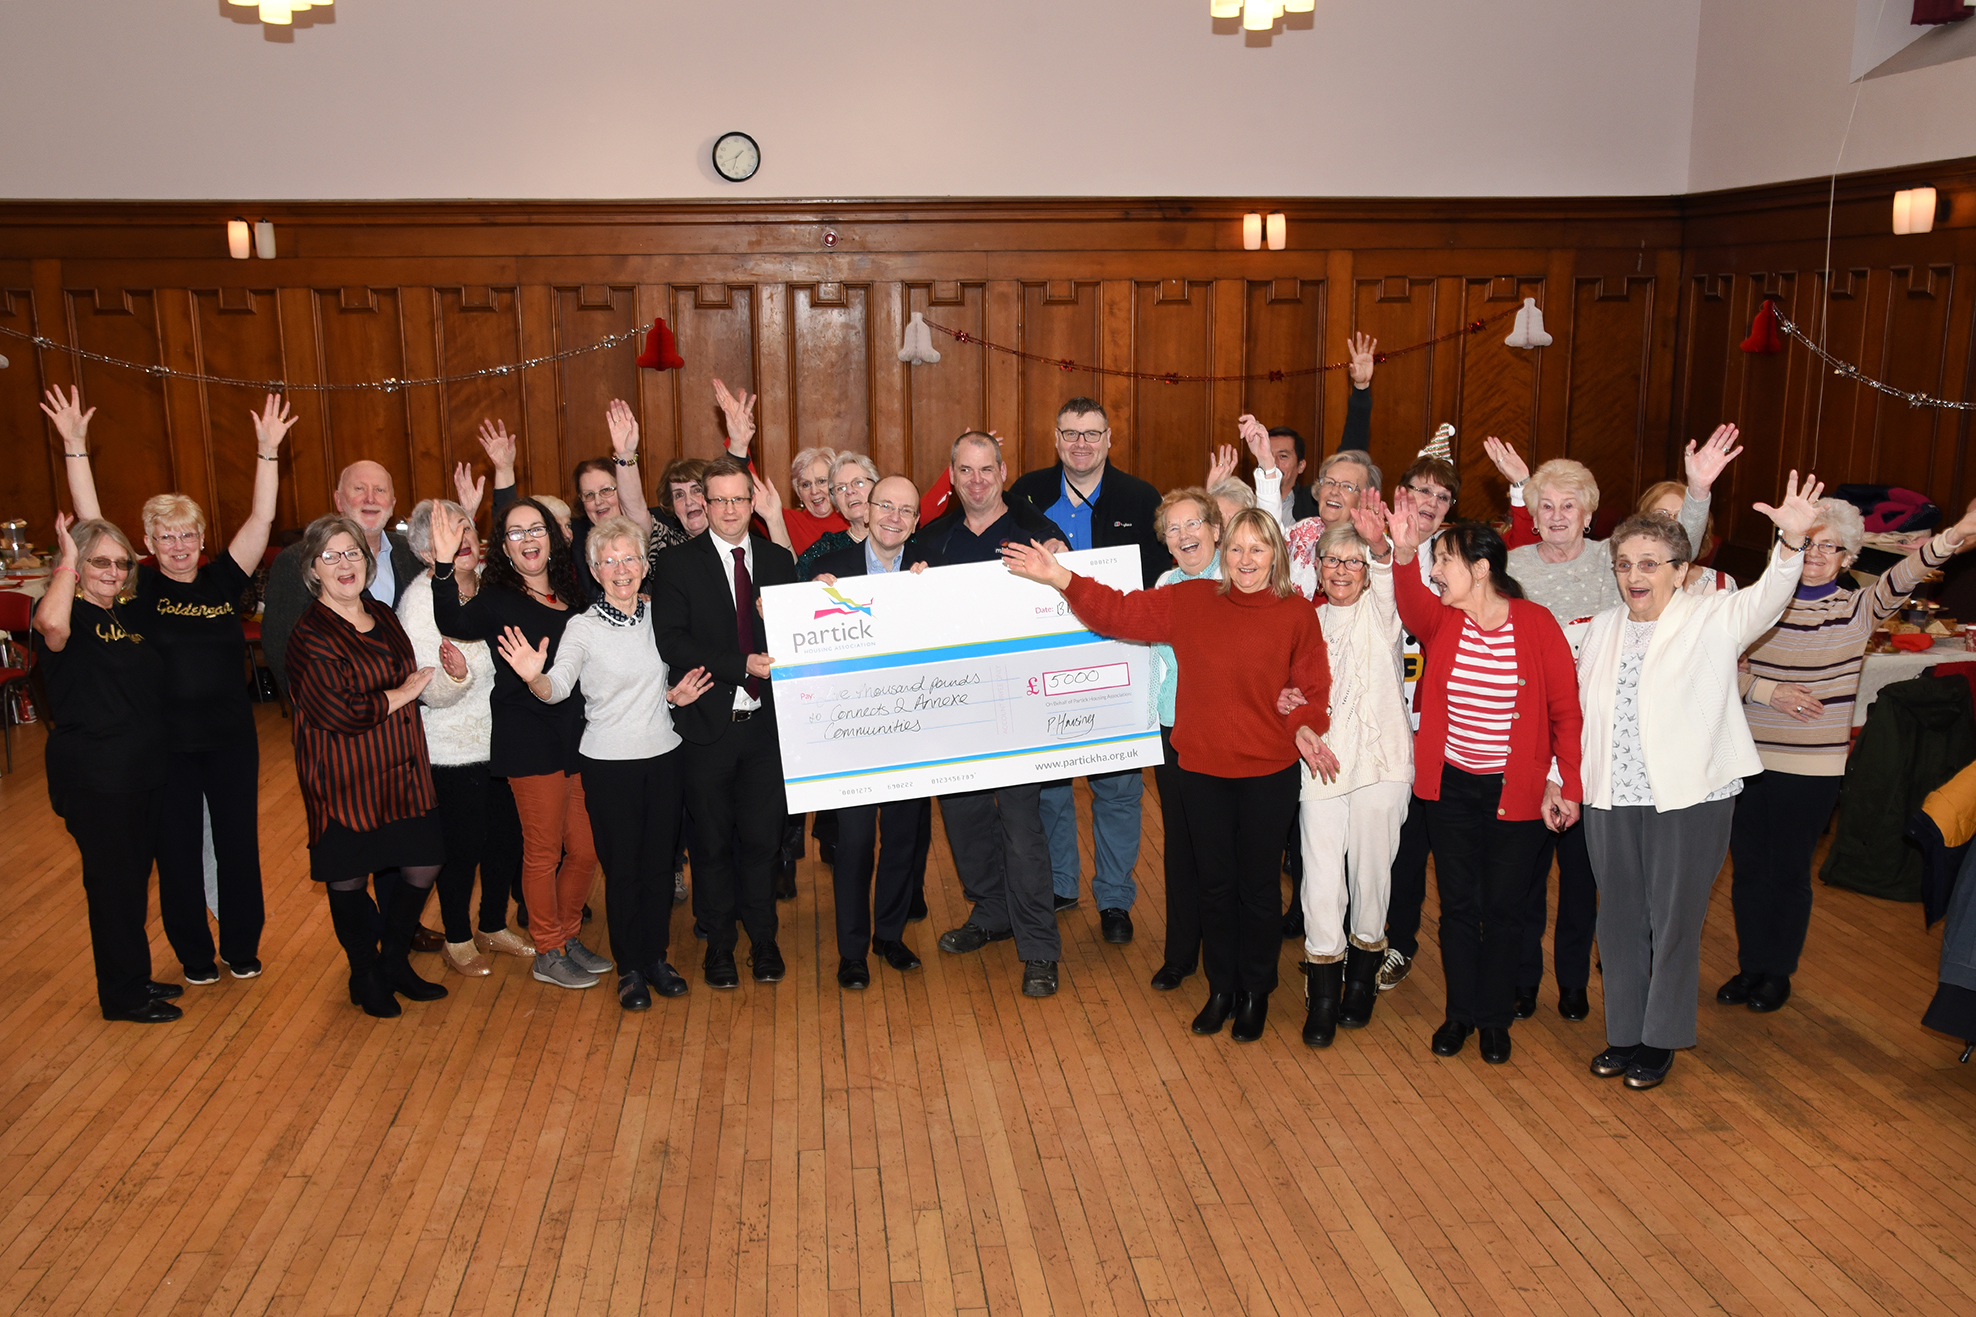 Partick Housing Association and partners present cheque for £5,000 at Christmas tea dance